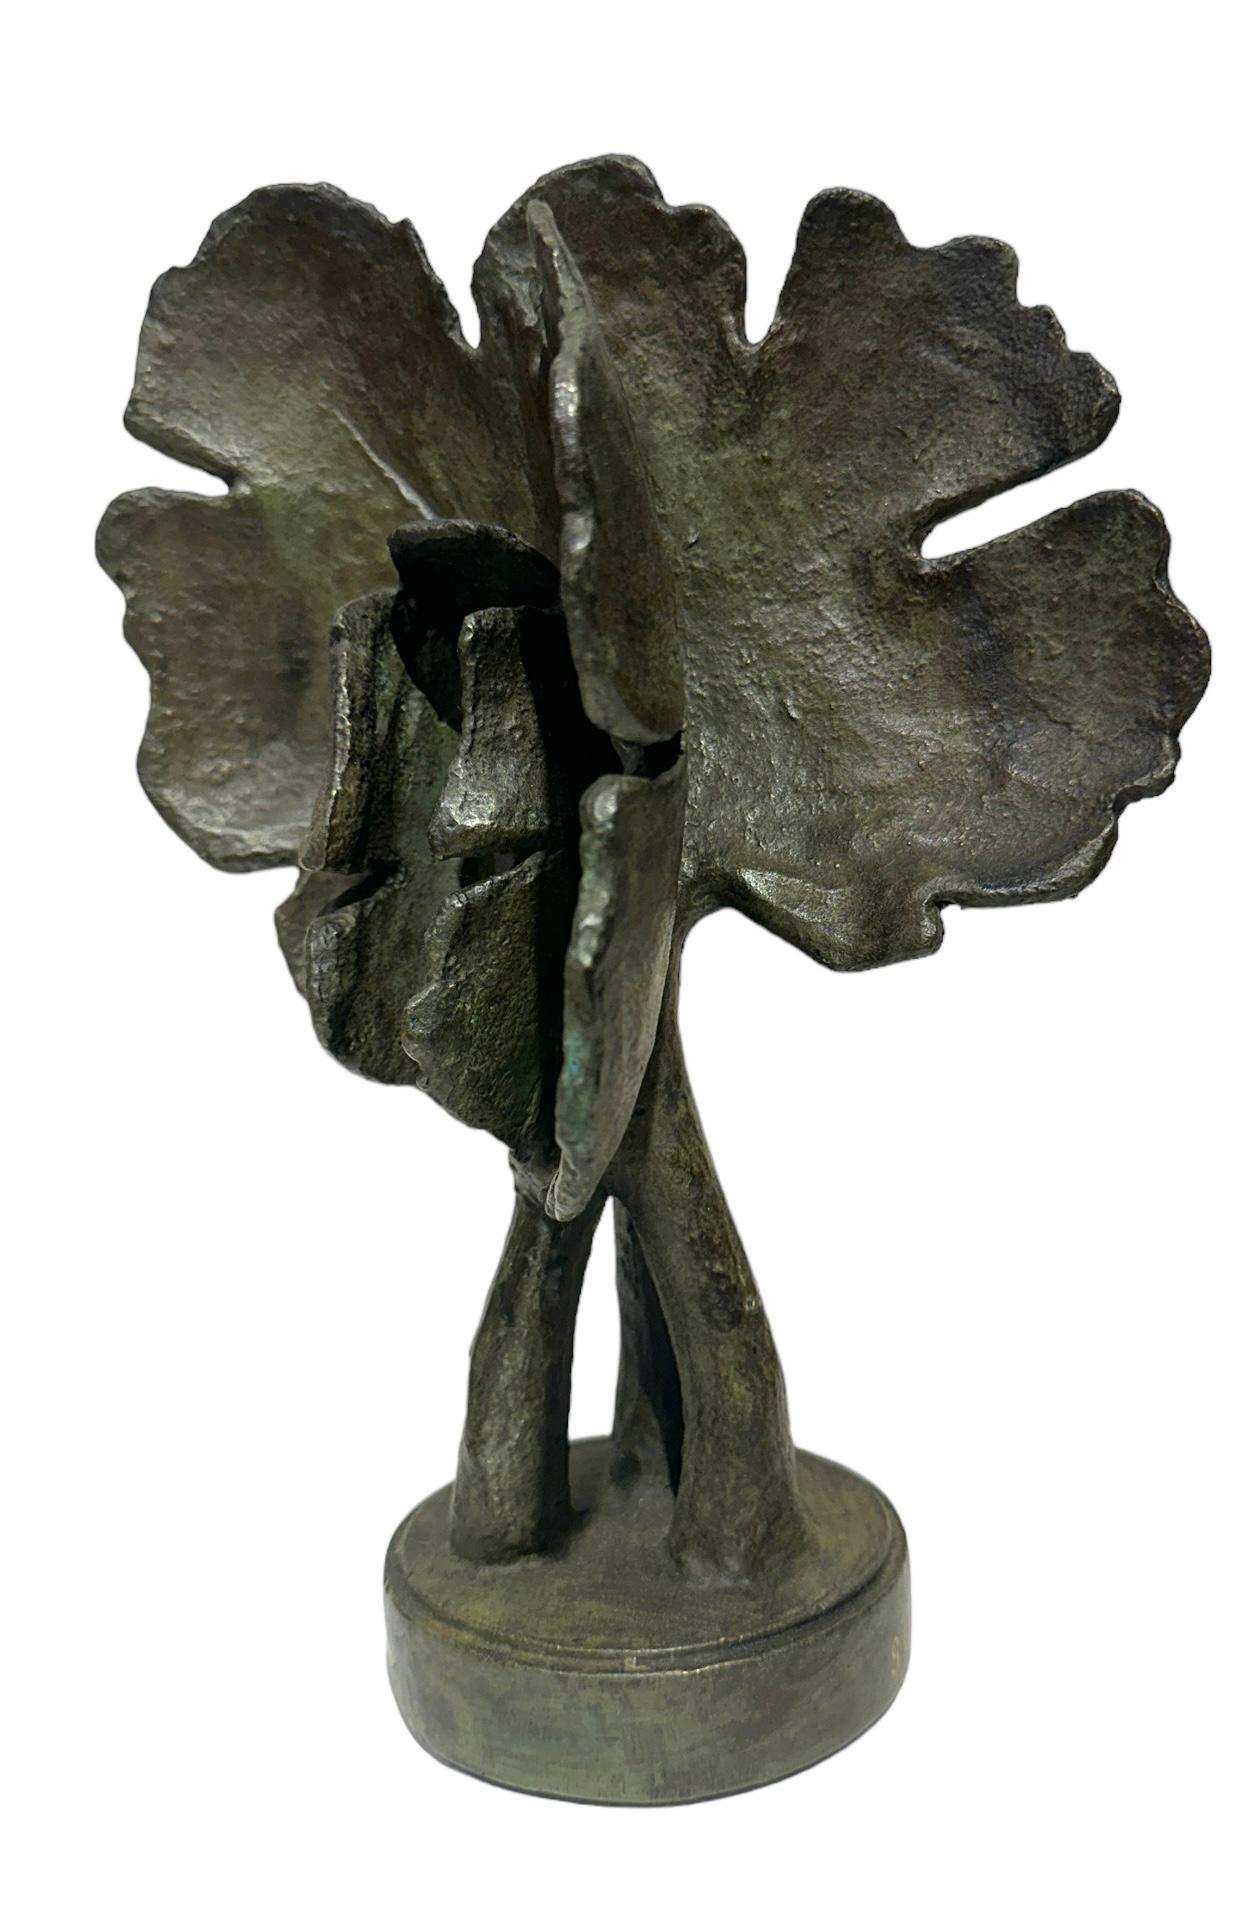 Bloodroot start to bloom before the foliage unfolds in early spring common in the upper Midwest of the United States. After blooming, the leaves unfurl to their full size as seen in this bronze sculpture by Sylvia Beckman. Made with the ancient lost